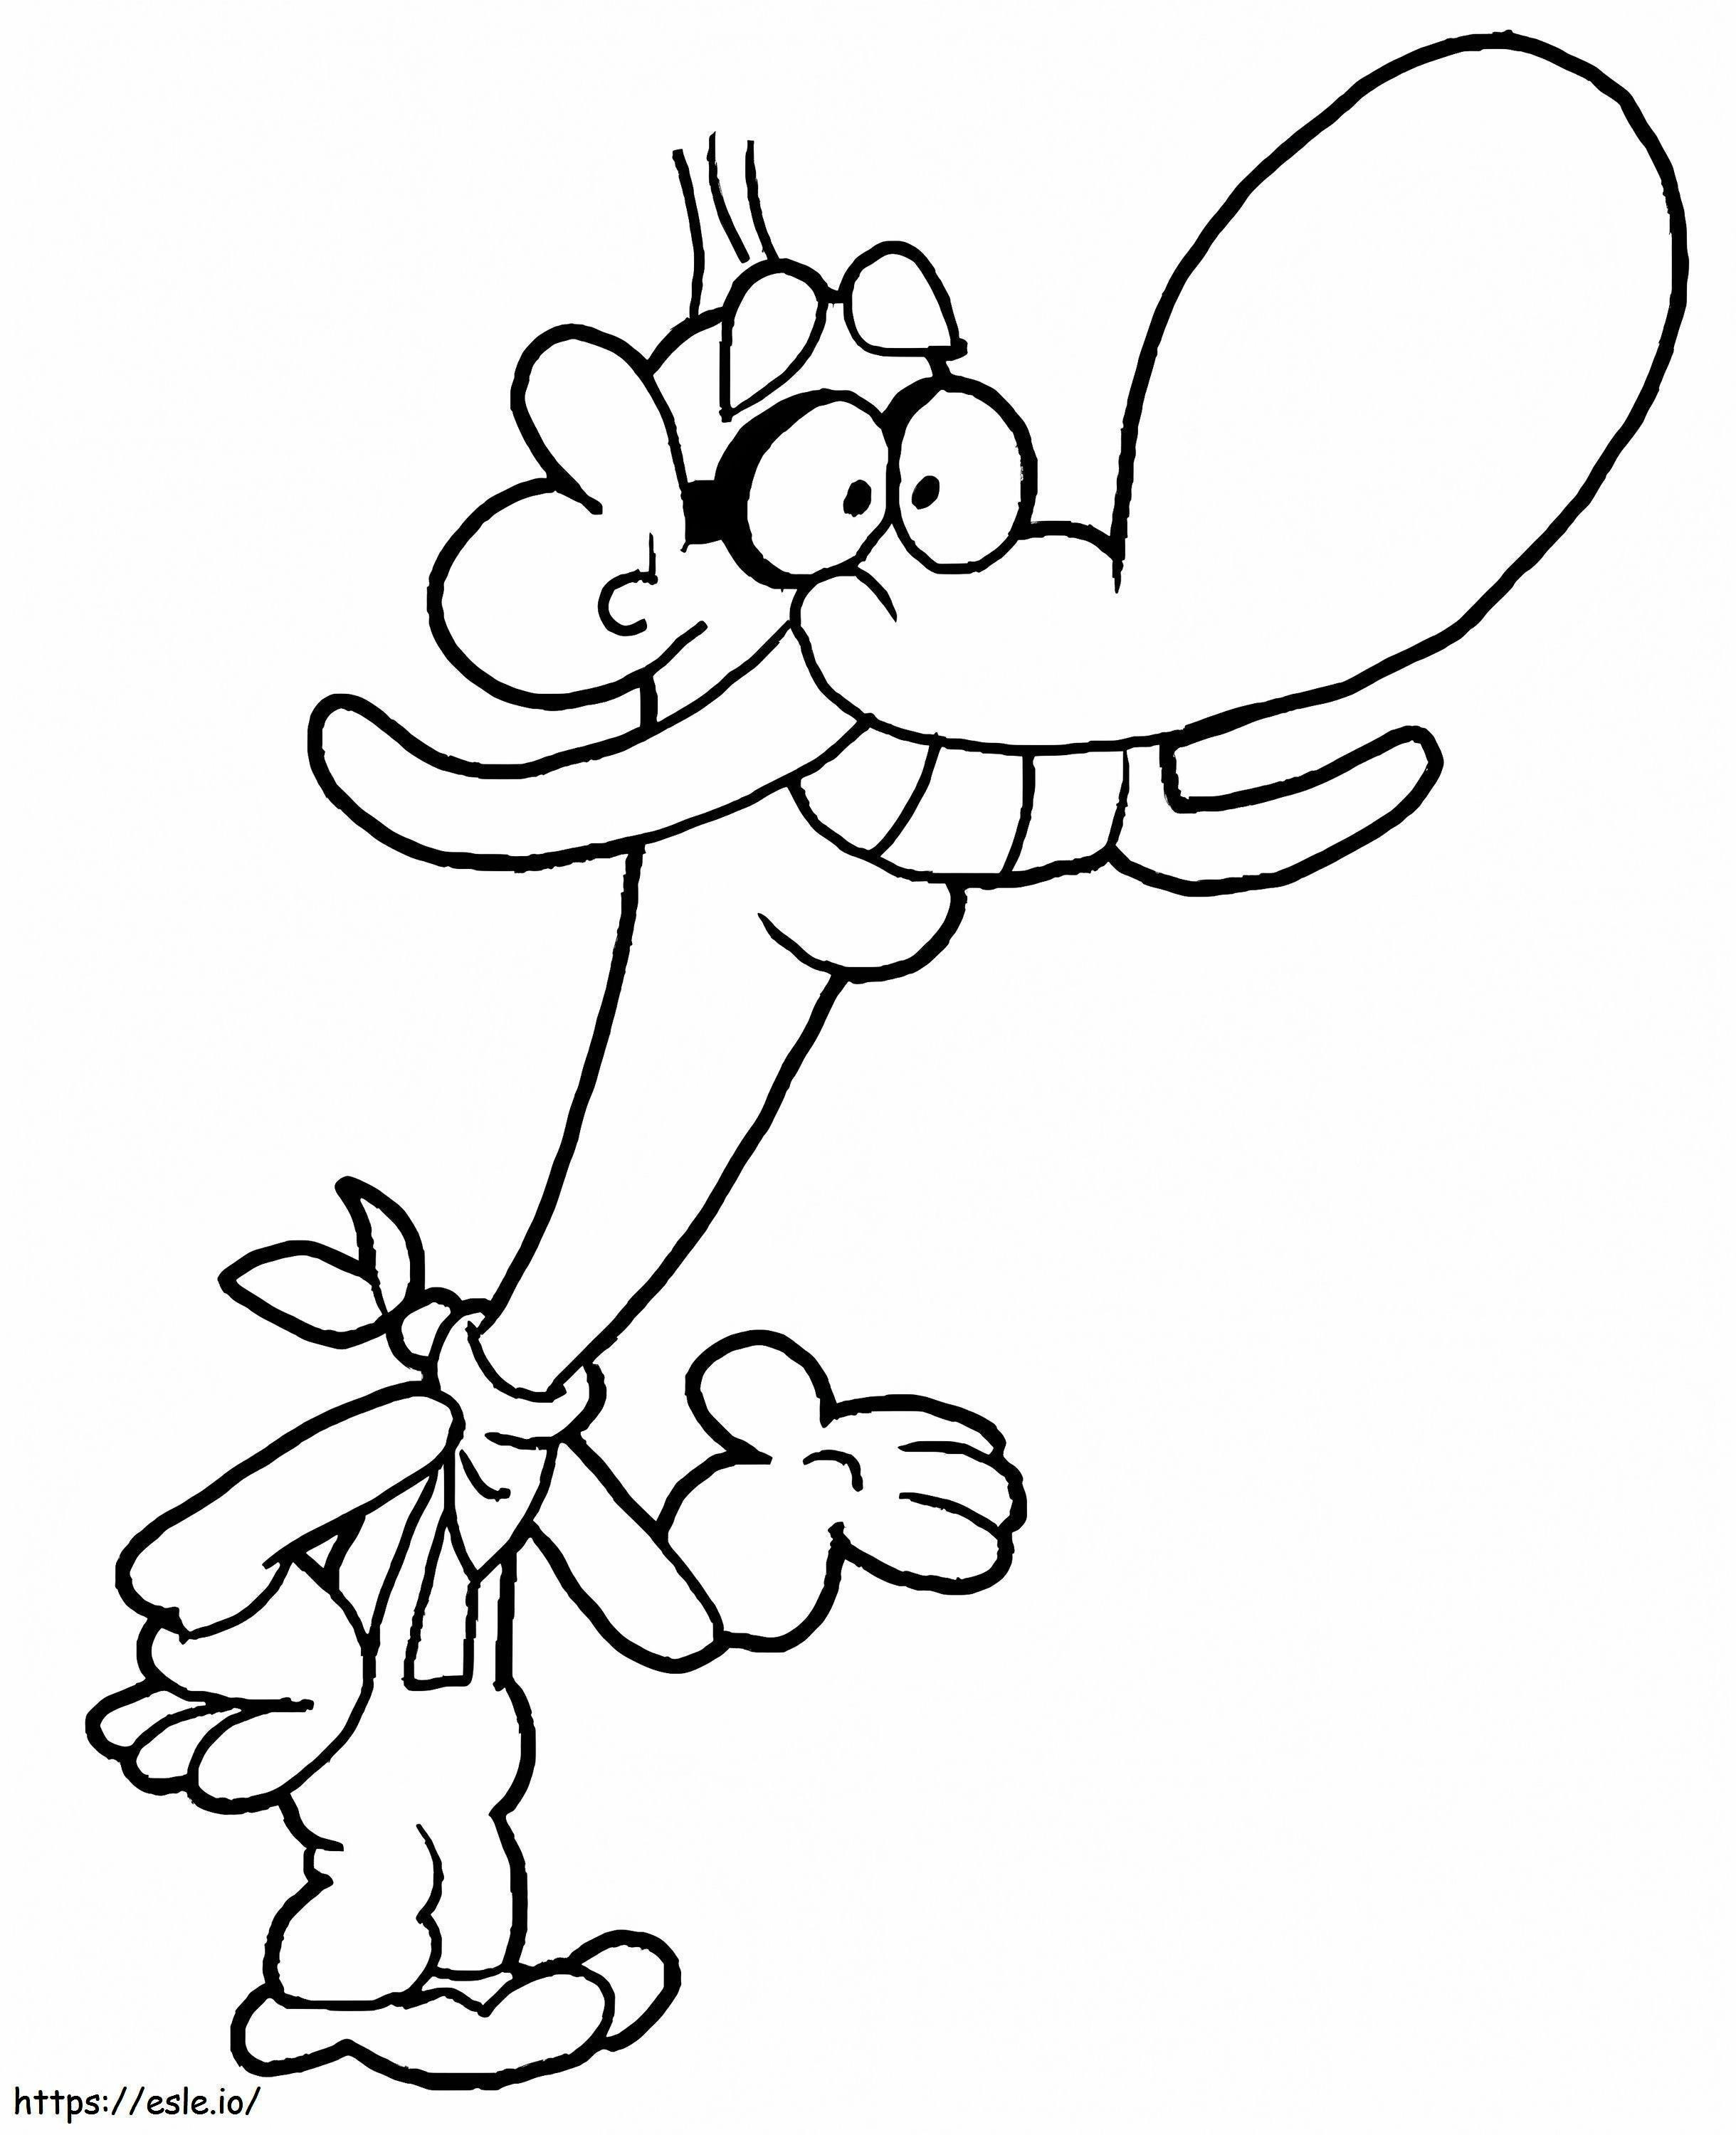 Mung Daal From Chowder coloring page